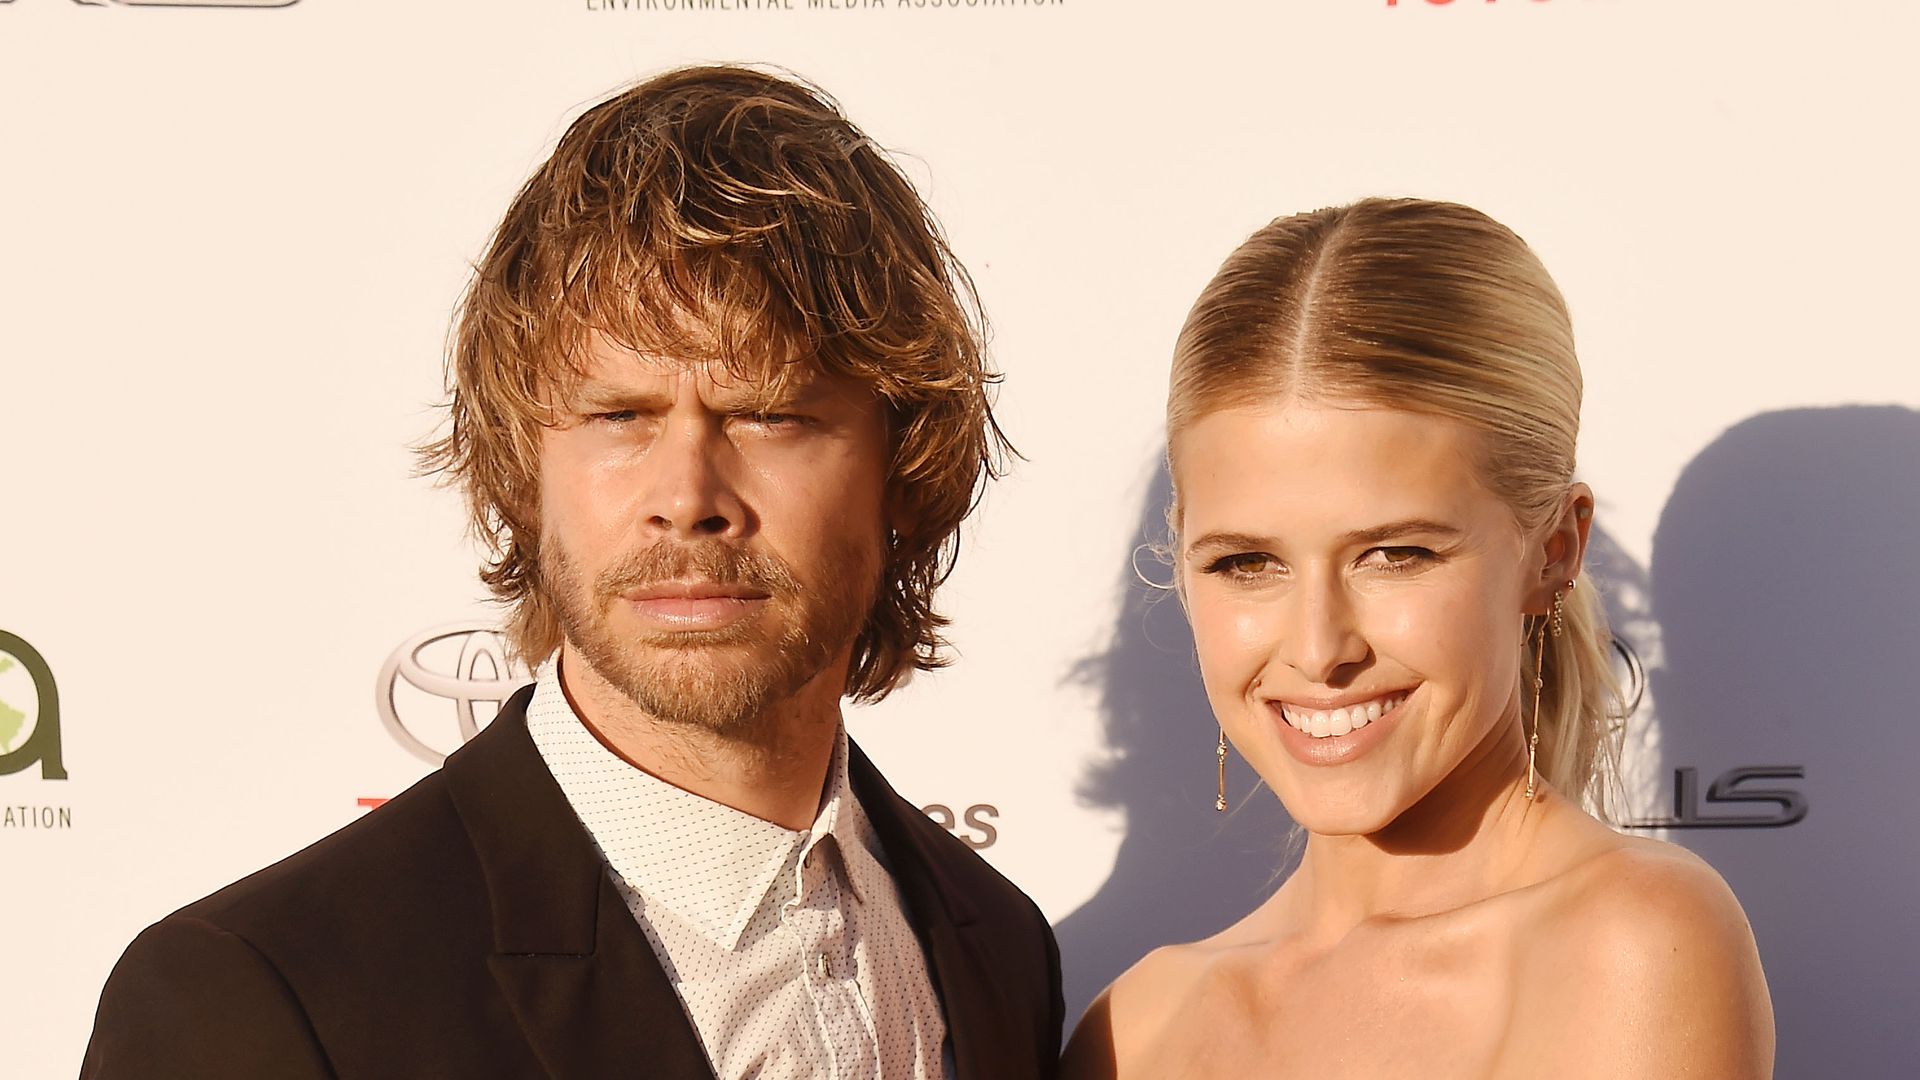 Eric Christian Olsen and Sarah Wright Olsen arrive at the 27th Annual EMA Awards